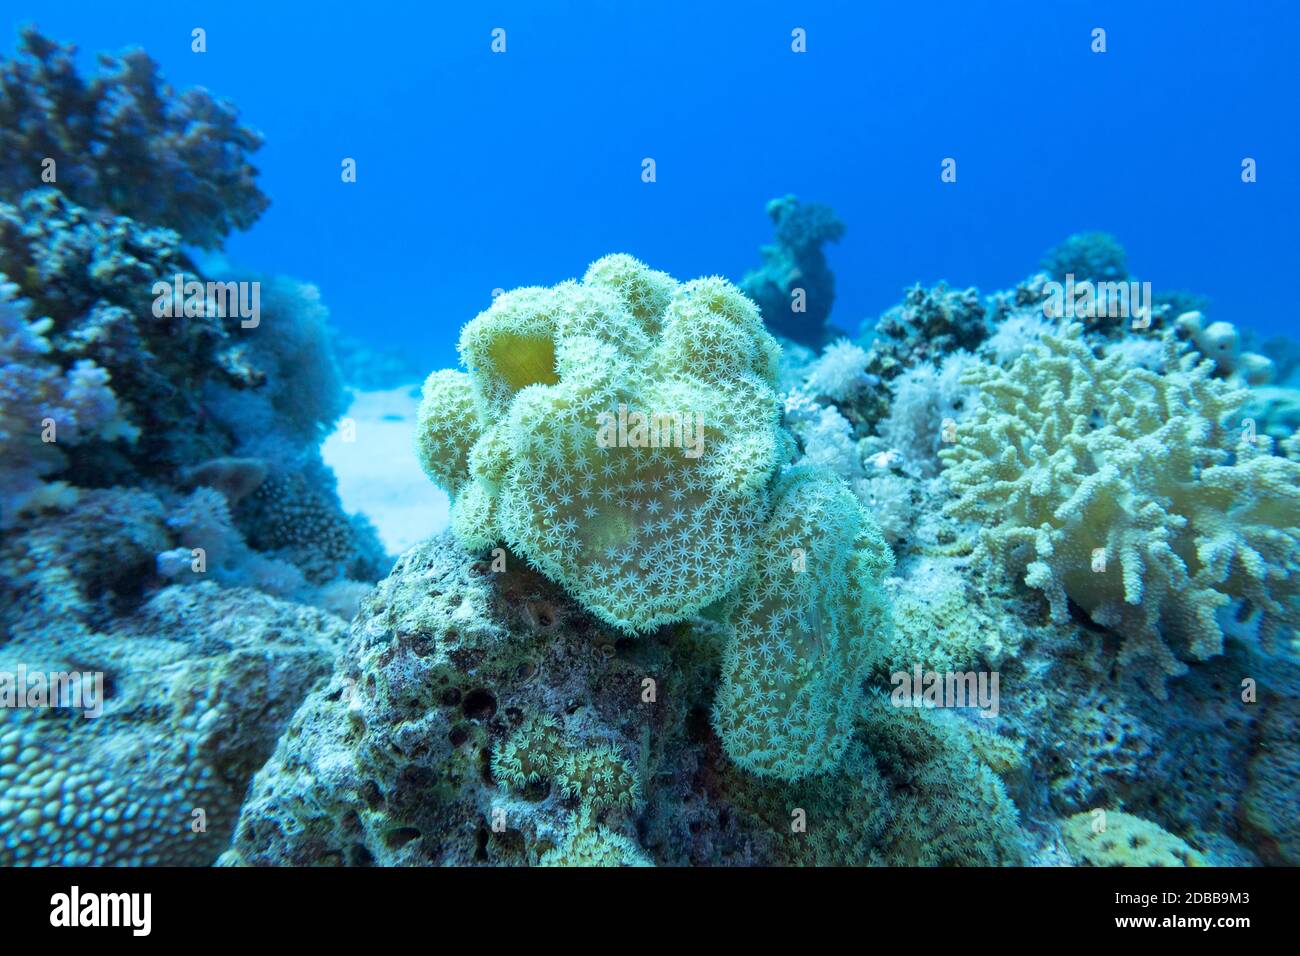 Colorful coral reef at the bottom of tropical sea, Sarcophyton coral known as leather coral;  underwater landscape Stock Photo